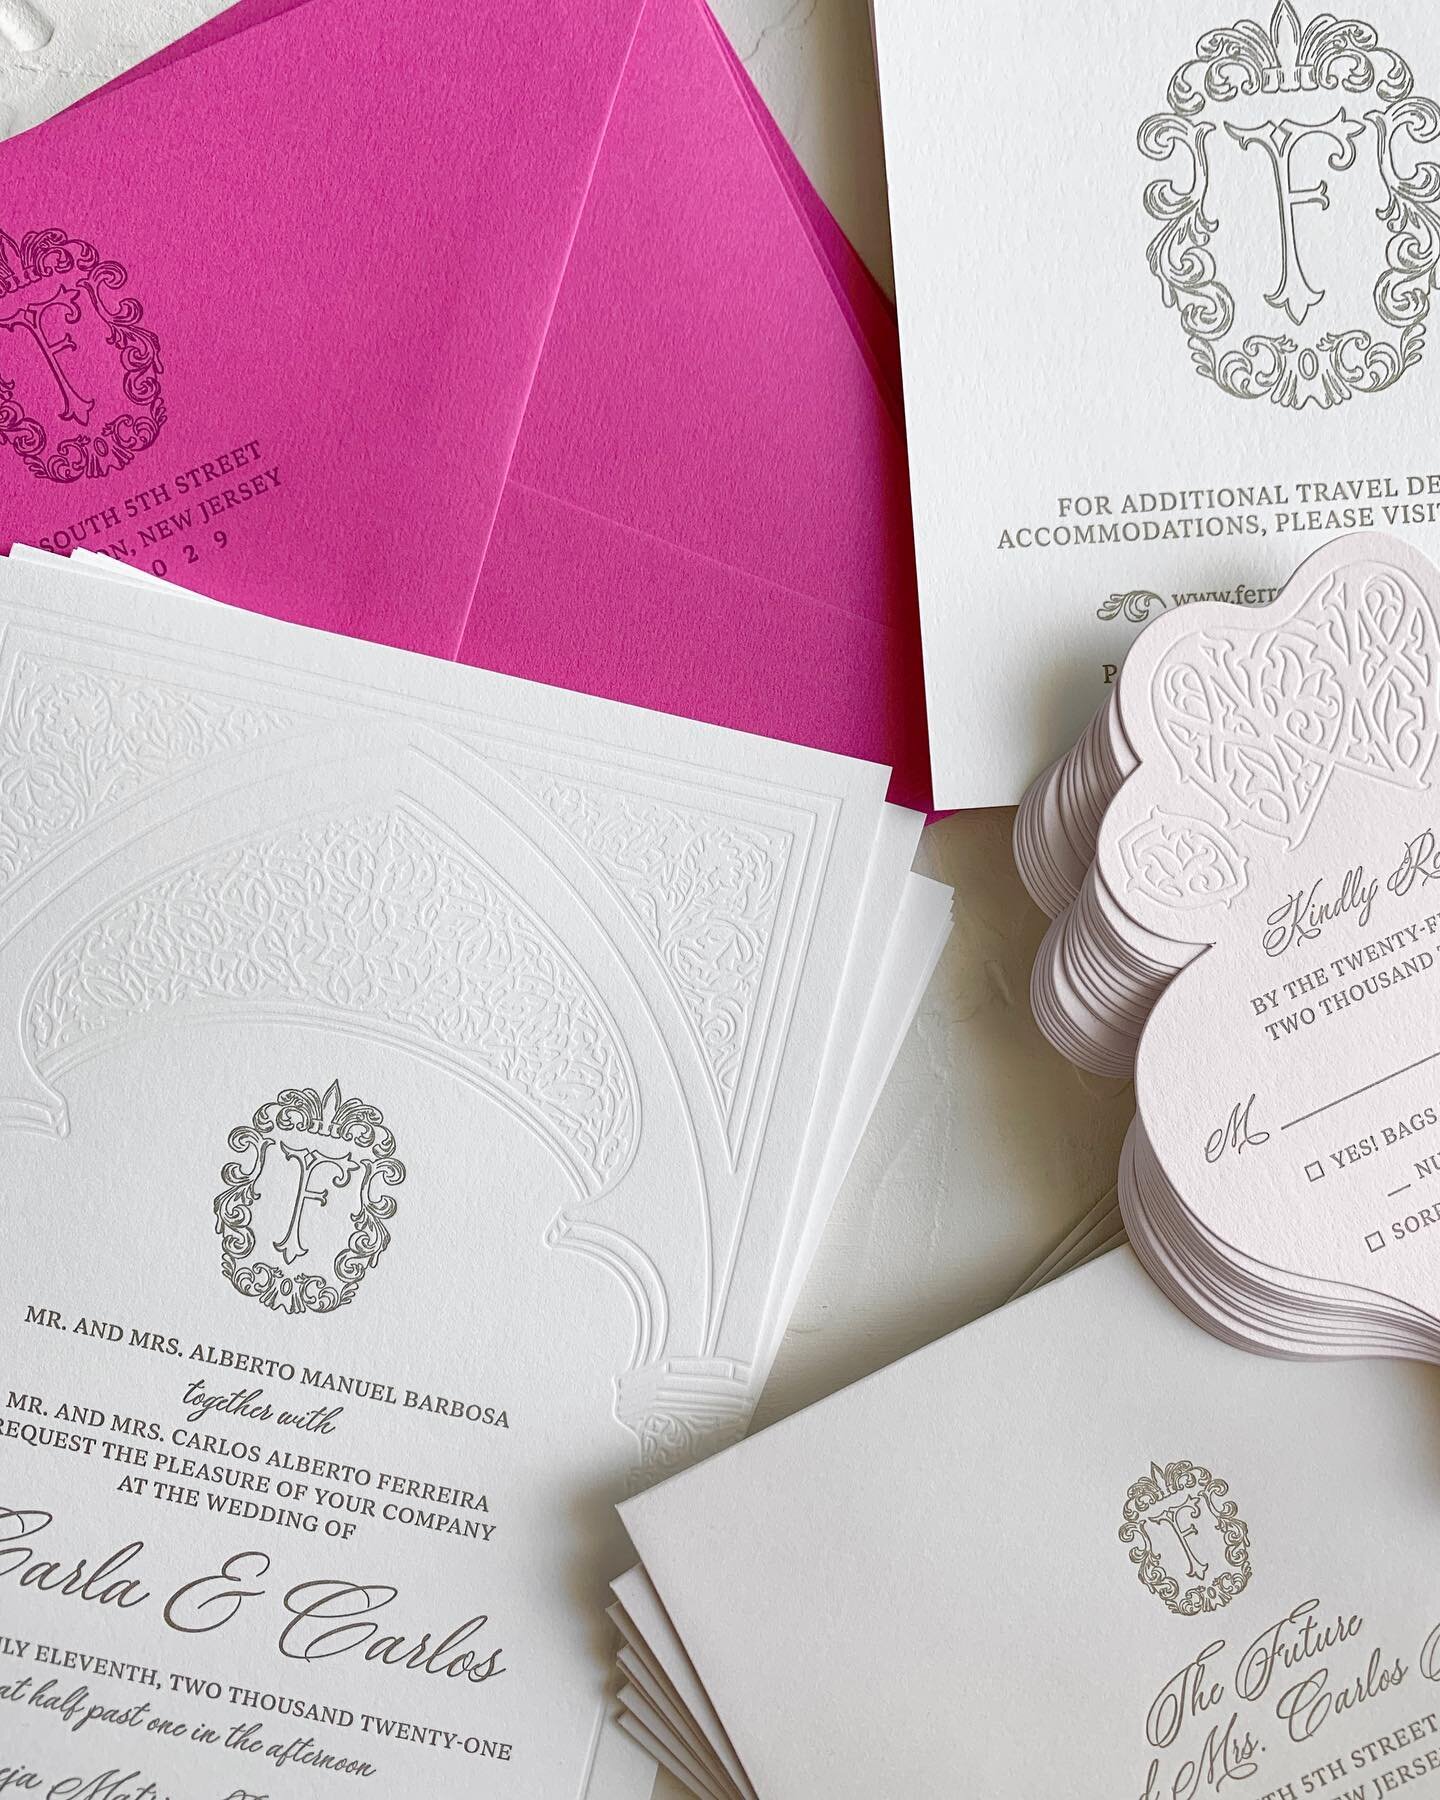 These fuchsia envelopes add a fun pop of color and provide a strong contrast with the ornate blind letterpress from this English and Portuguese style invitation suite.

#letterpressinvitations #weddinginvitation #weddingstationery #letterpressstudio 